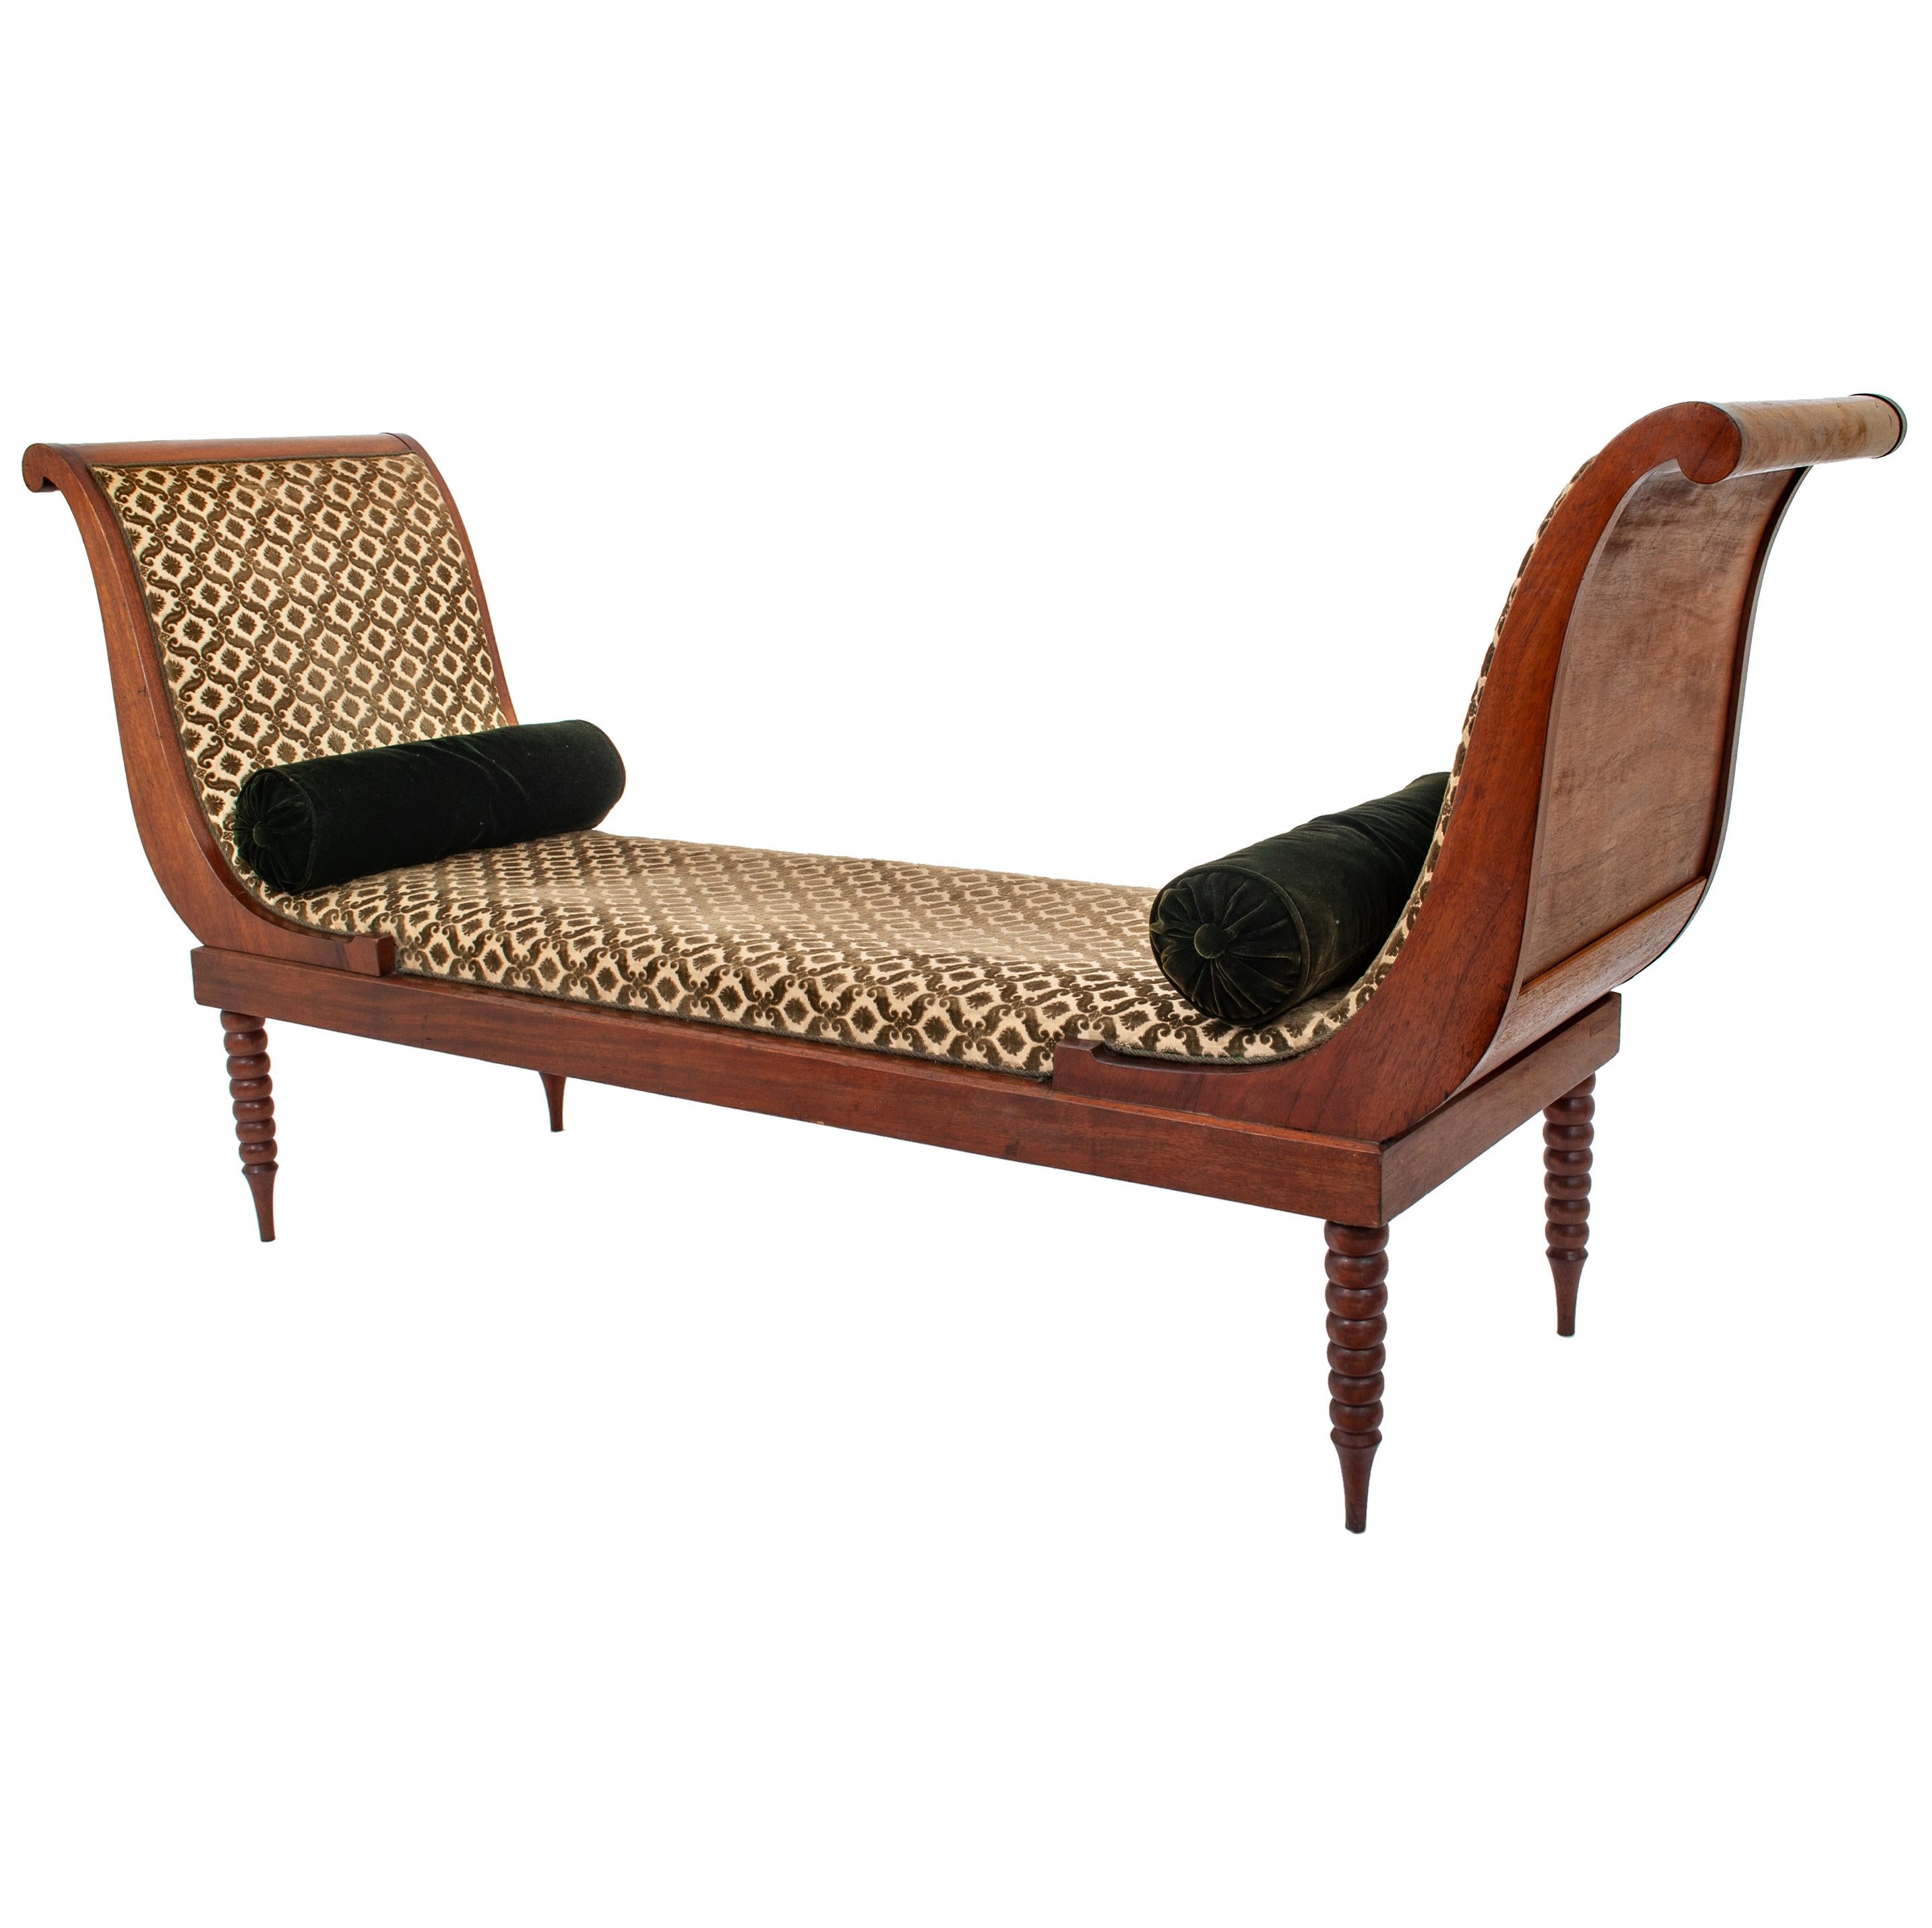 Mid-19th Century Antique American Neoclassical Mahogany Bustle Bench Window Seat Day Bed, 1860